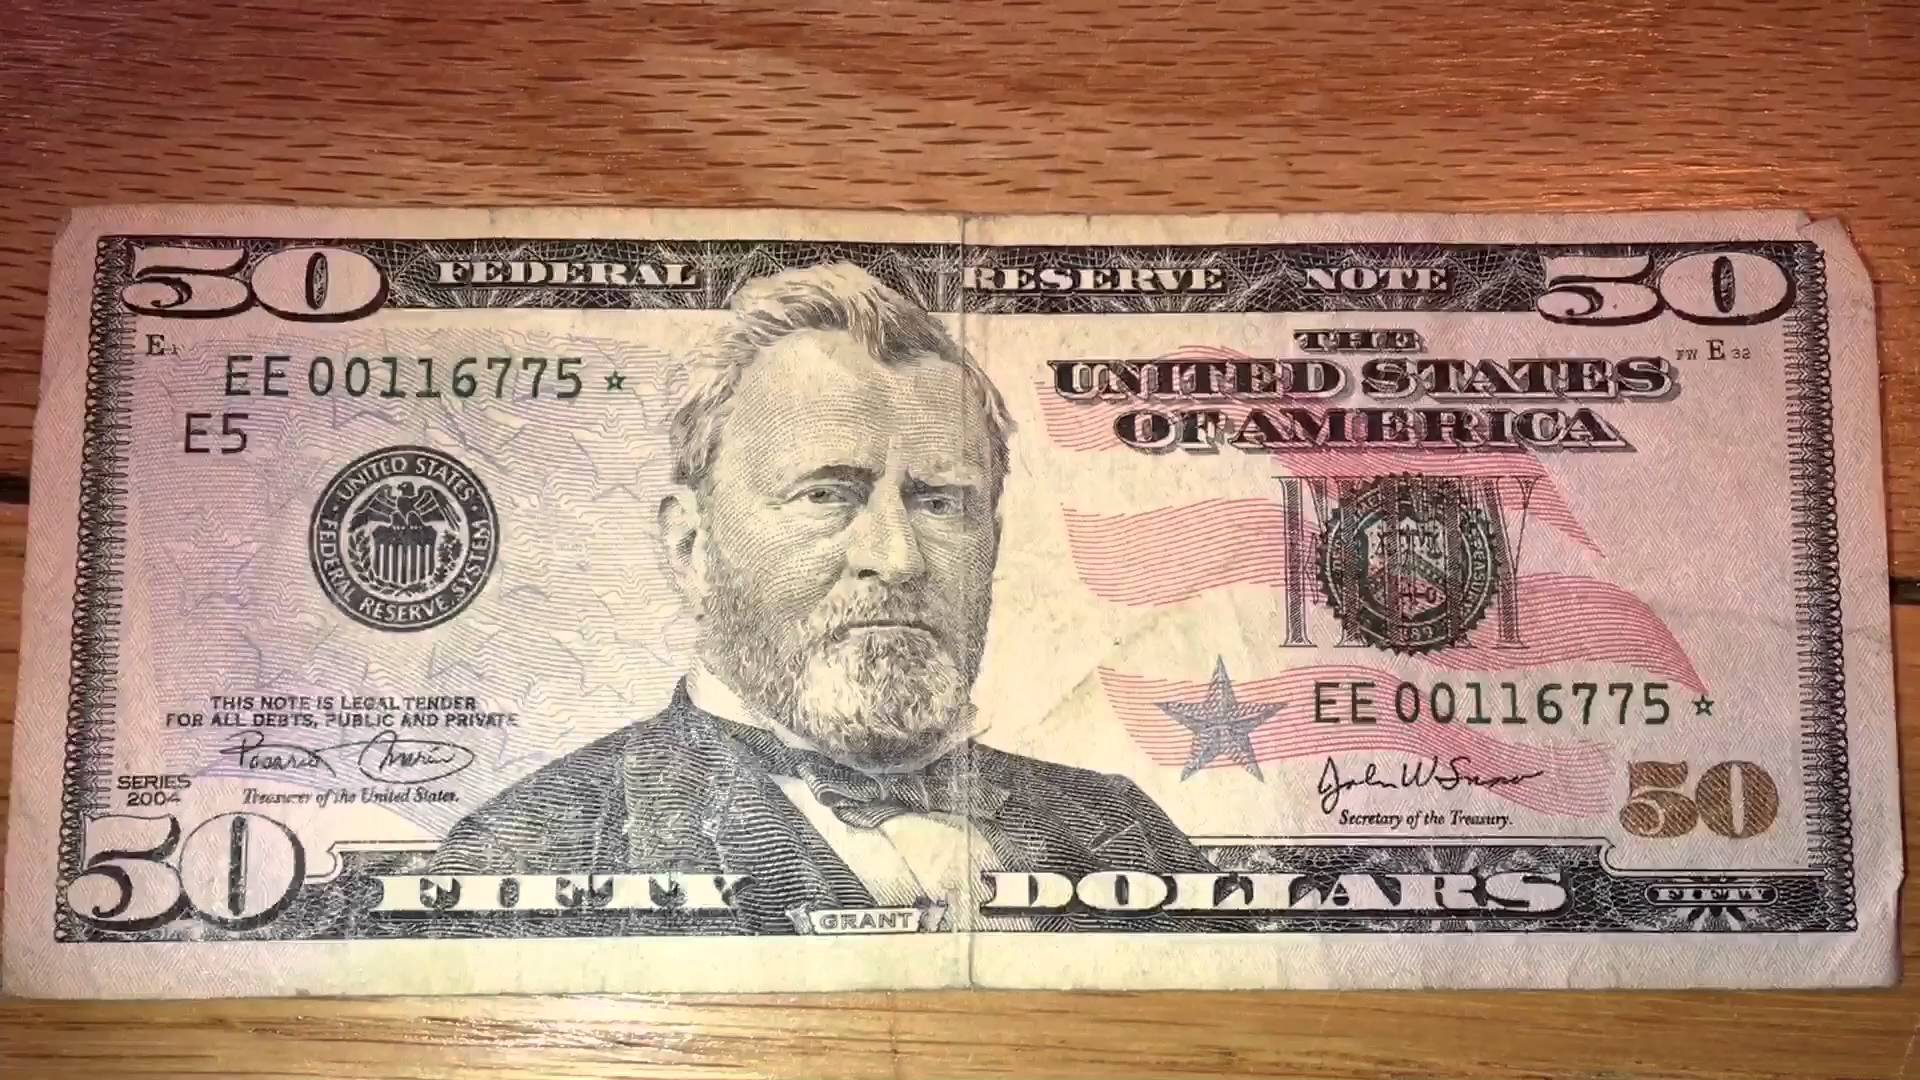 Very Old 50 Dollar Bill Vs New Fifty Review - YouTube